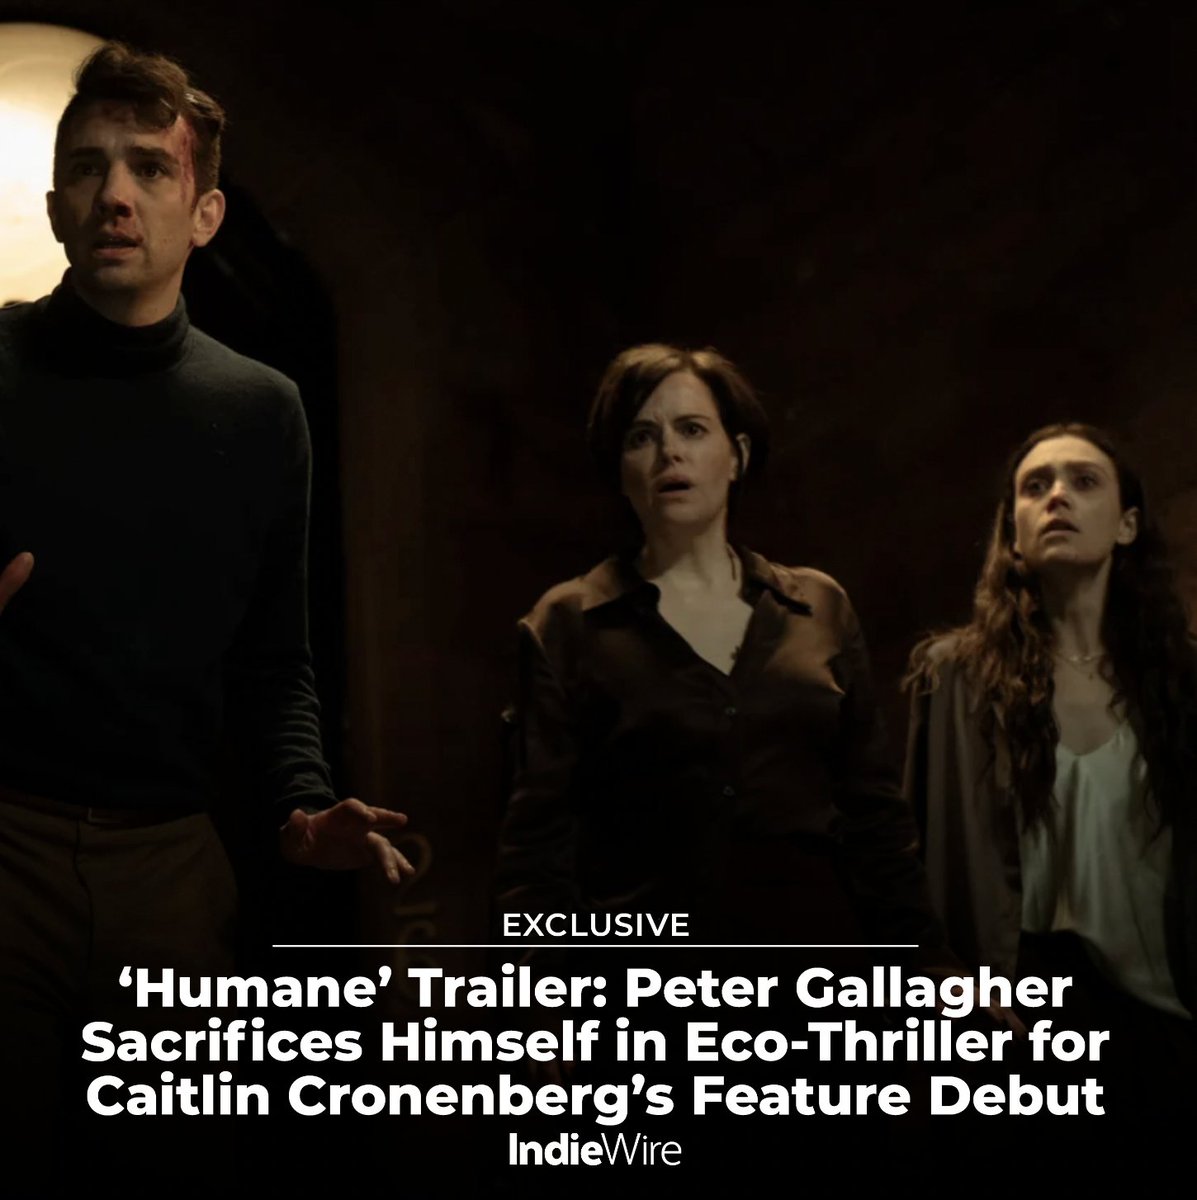 Caitlin Cronenberg‘s directorial feature debut “Humane” is a family thriller starring Peter Gallagher as a patriarch whose suicide plan goes haywire. Watch the trailer for 'Humane,' an IndieWire exclusive: trib.al/e2UobIL